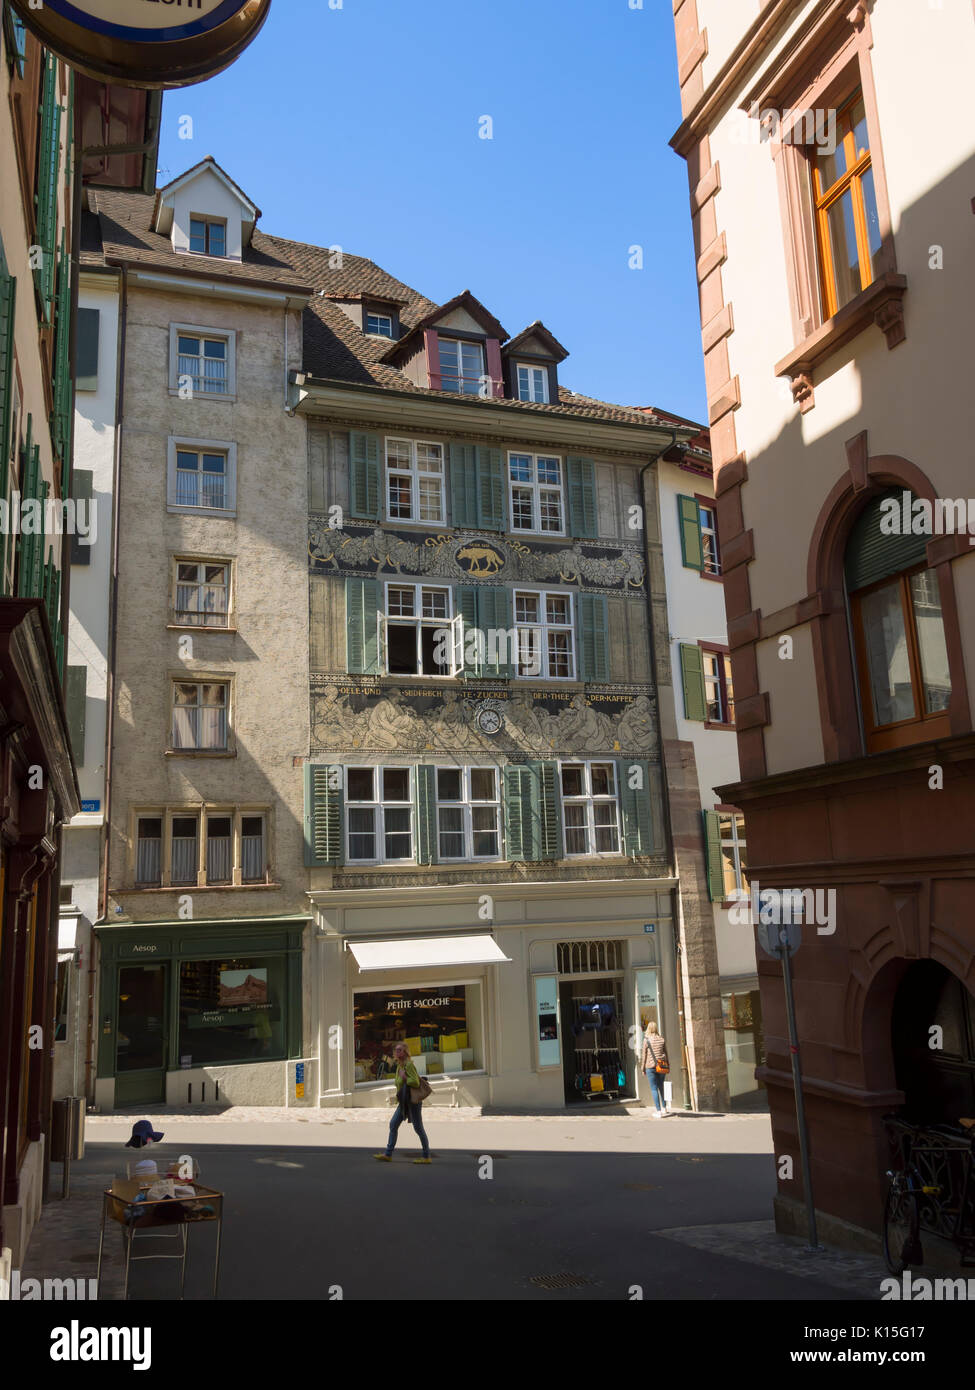 Old town Basel, Switzerland. View of a building on Spalenberg that was once a spice, sugar, tea and coffee shop. Stock Photo